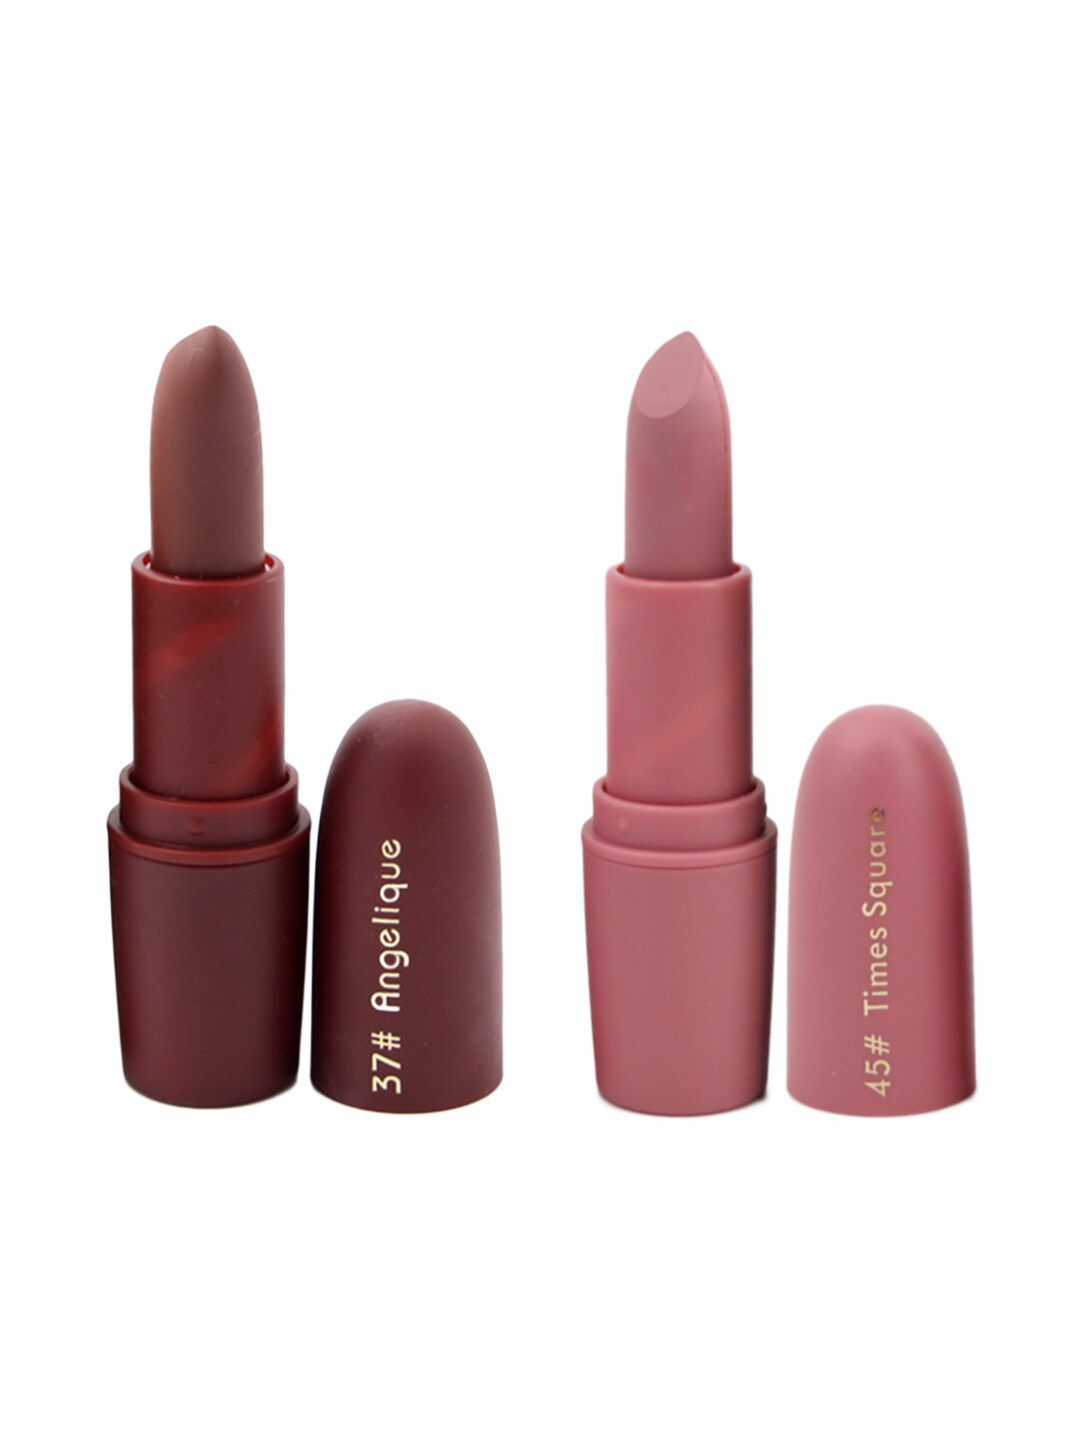 MISS ROSE Set of 2 Matte Creamy Lipsticks - Angelique 37 & Times Square 45 Price in India